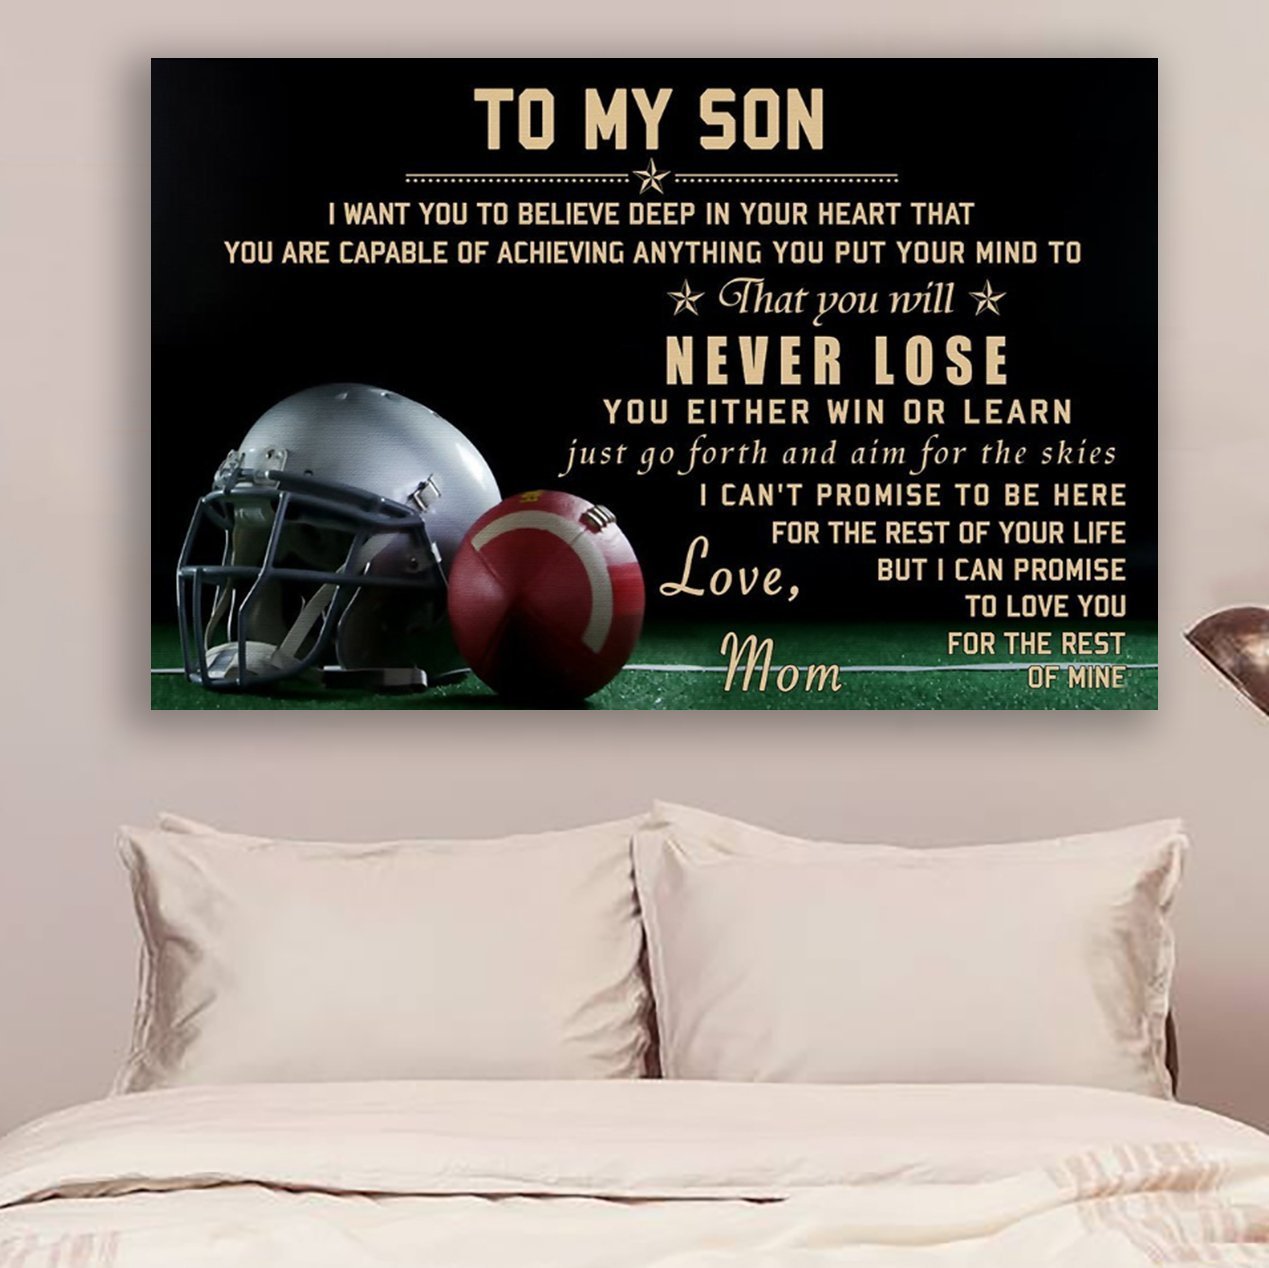 Football Canvas and Poster ��� mom to son ��� never lose wall decor visual art - GIFTCUSTOM